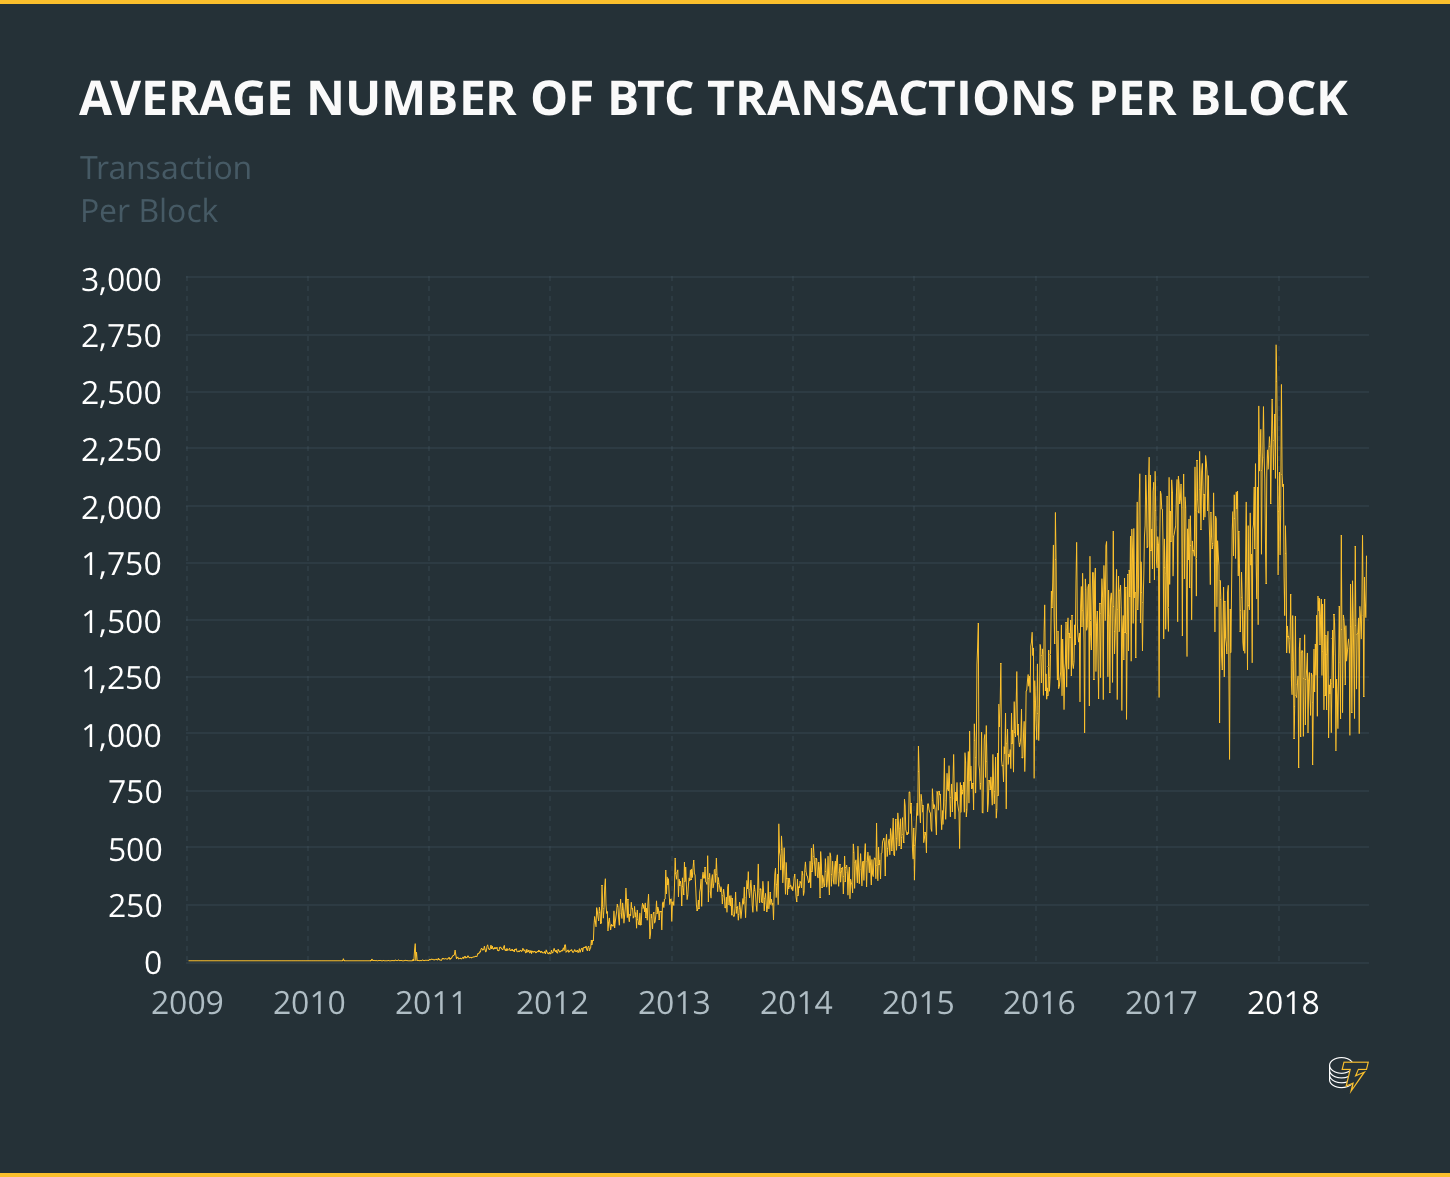 The average number of transactions per block